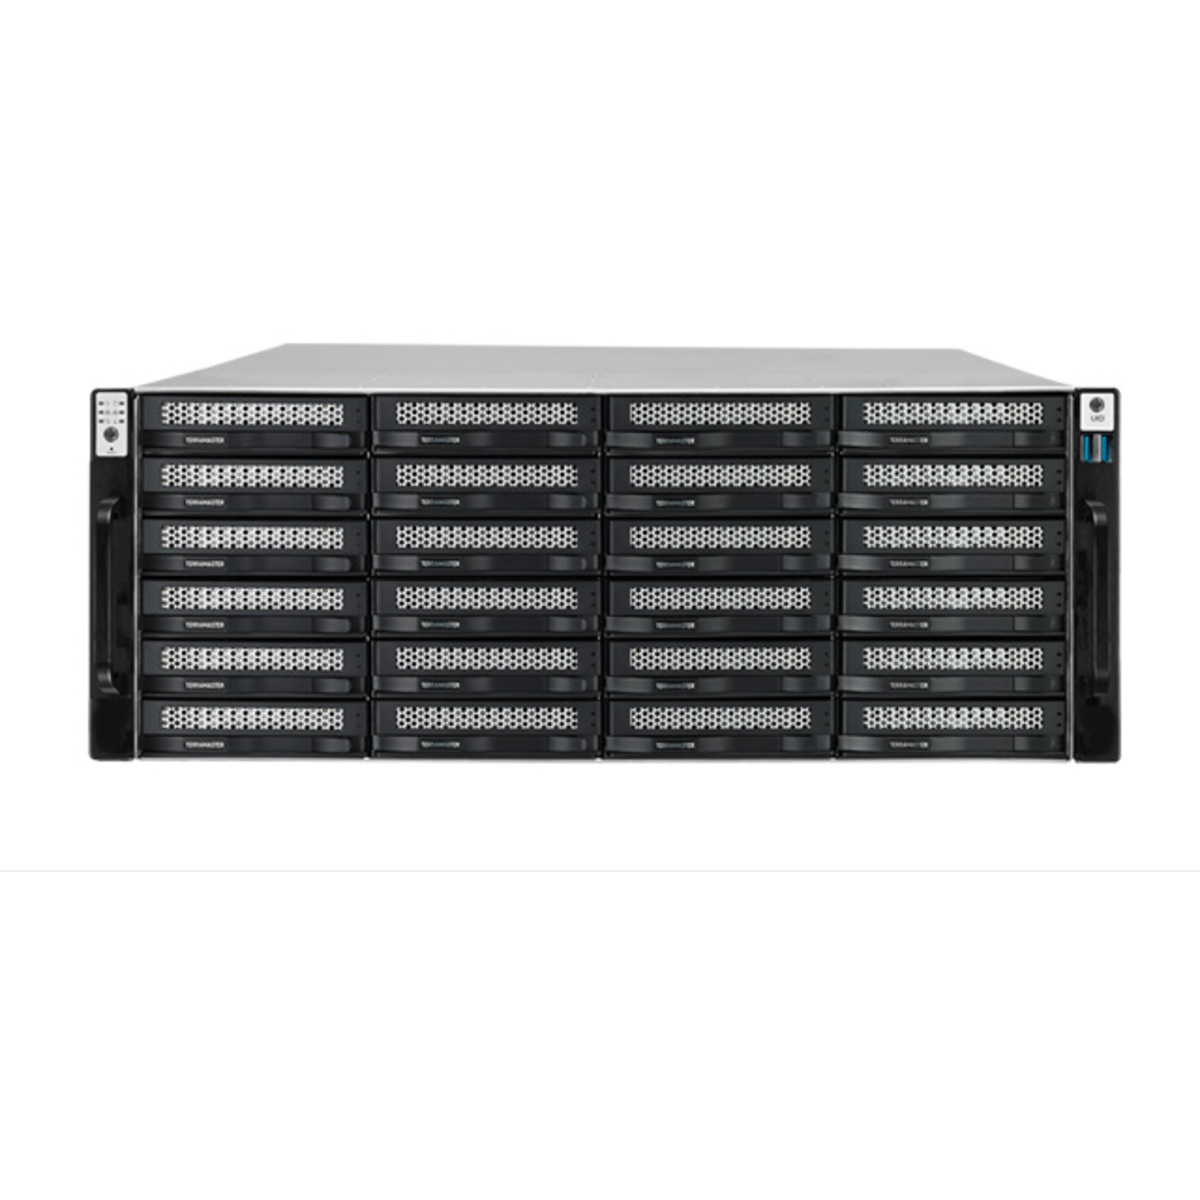 TerraMaster U24-722-2224 132tb 24-Bay RackMount Large Business / Enterprise NAS - Network Attached Storage Device 22x6tb Seagate EXOS 7E10 ST6000NM019B 3.5 7200rpm SATA 6Gb/s HDD ENTERPRISE Class Drives Installed - Burn-In Tested U24-722-2224